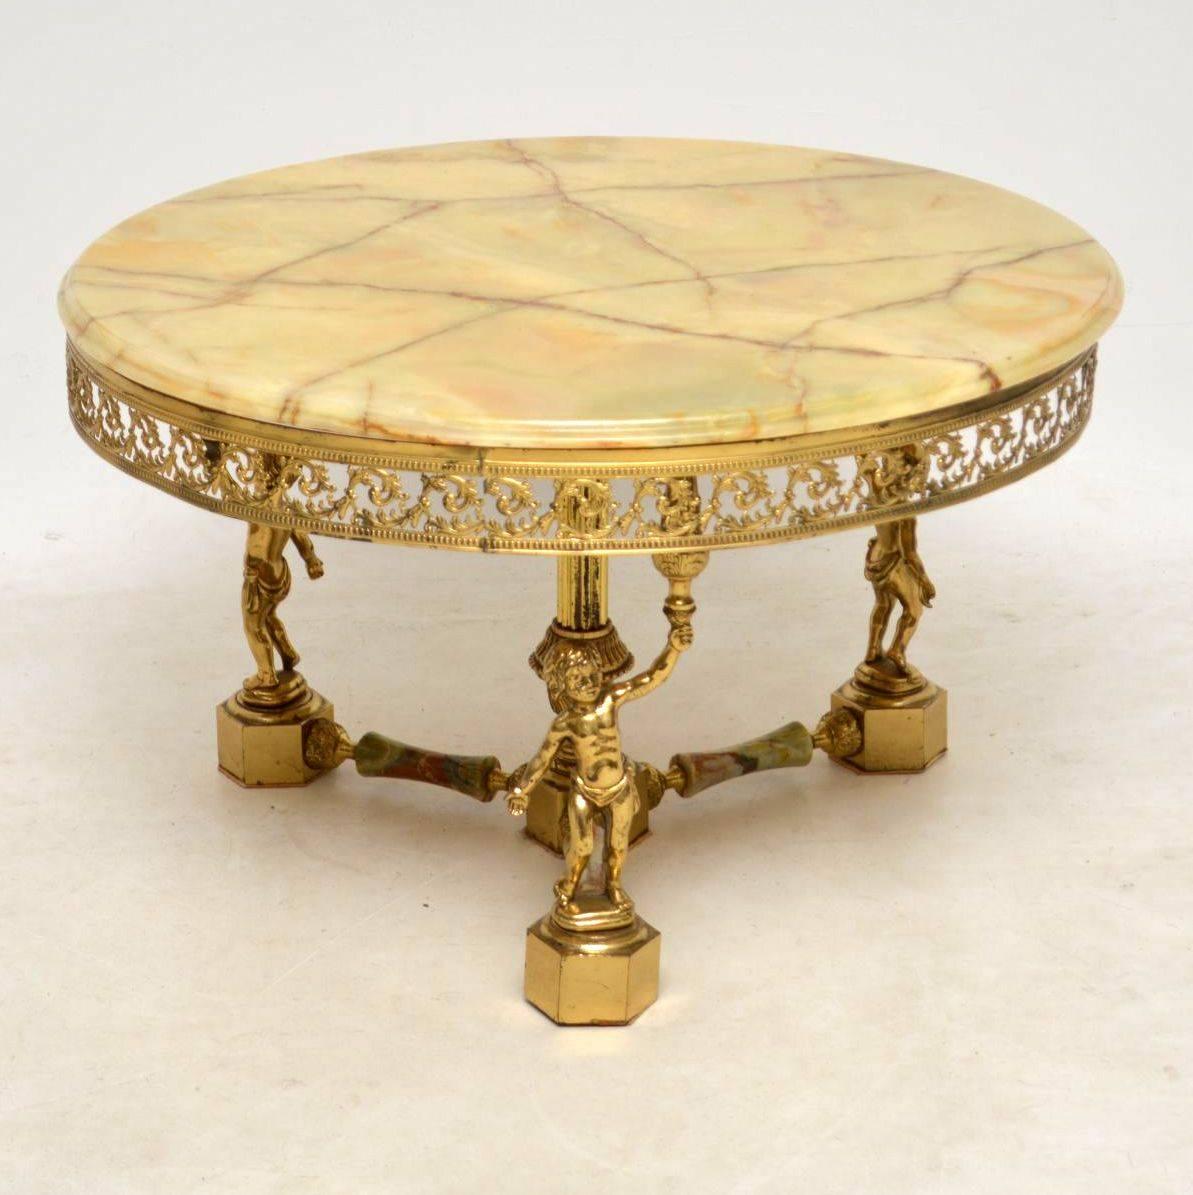 Antique circular onyx top brass coffee table in excellent condition and with some lovely features. it has some very intricate filigree work under the onyx top. The base consists of three cherubs holding up the top. There is a central column with